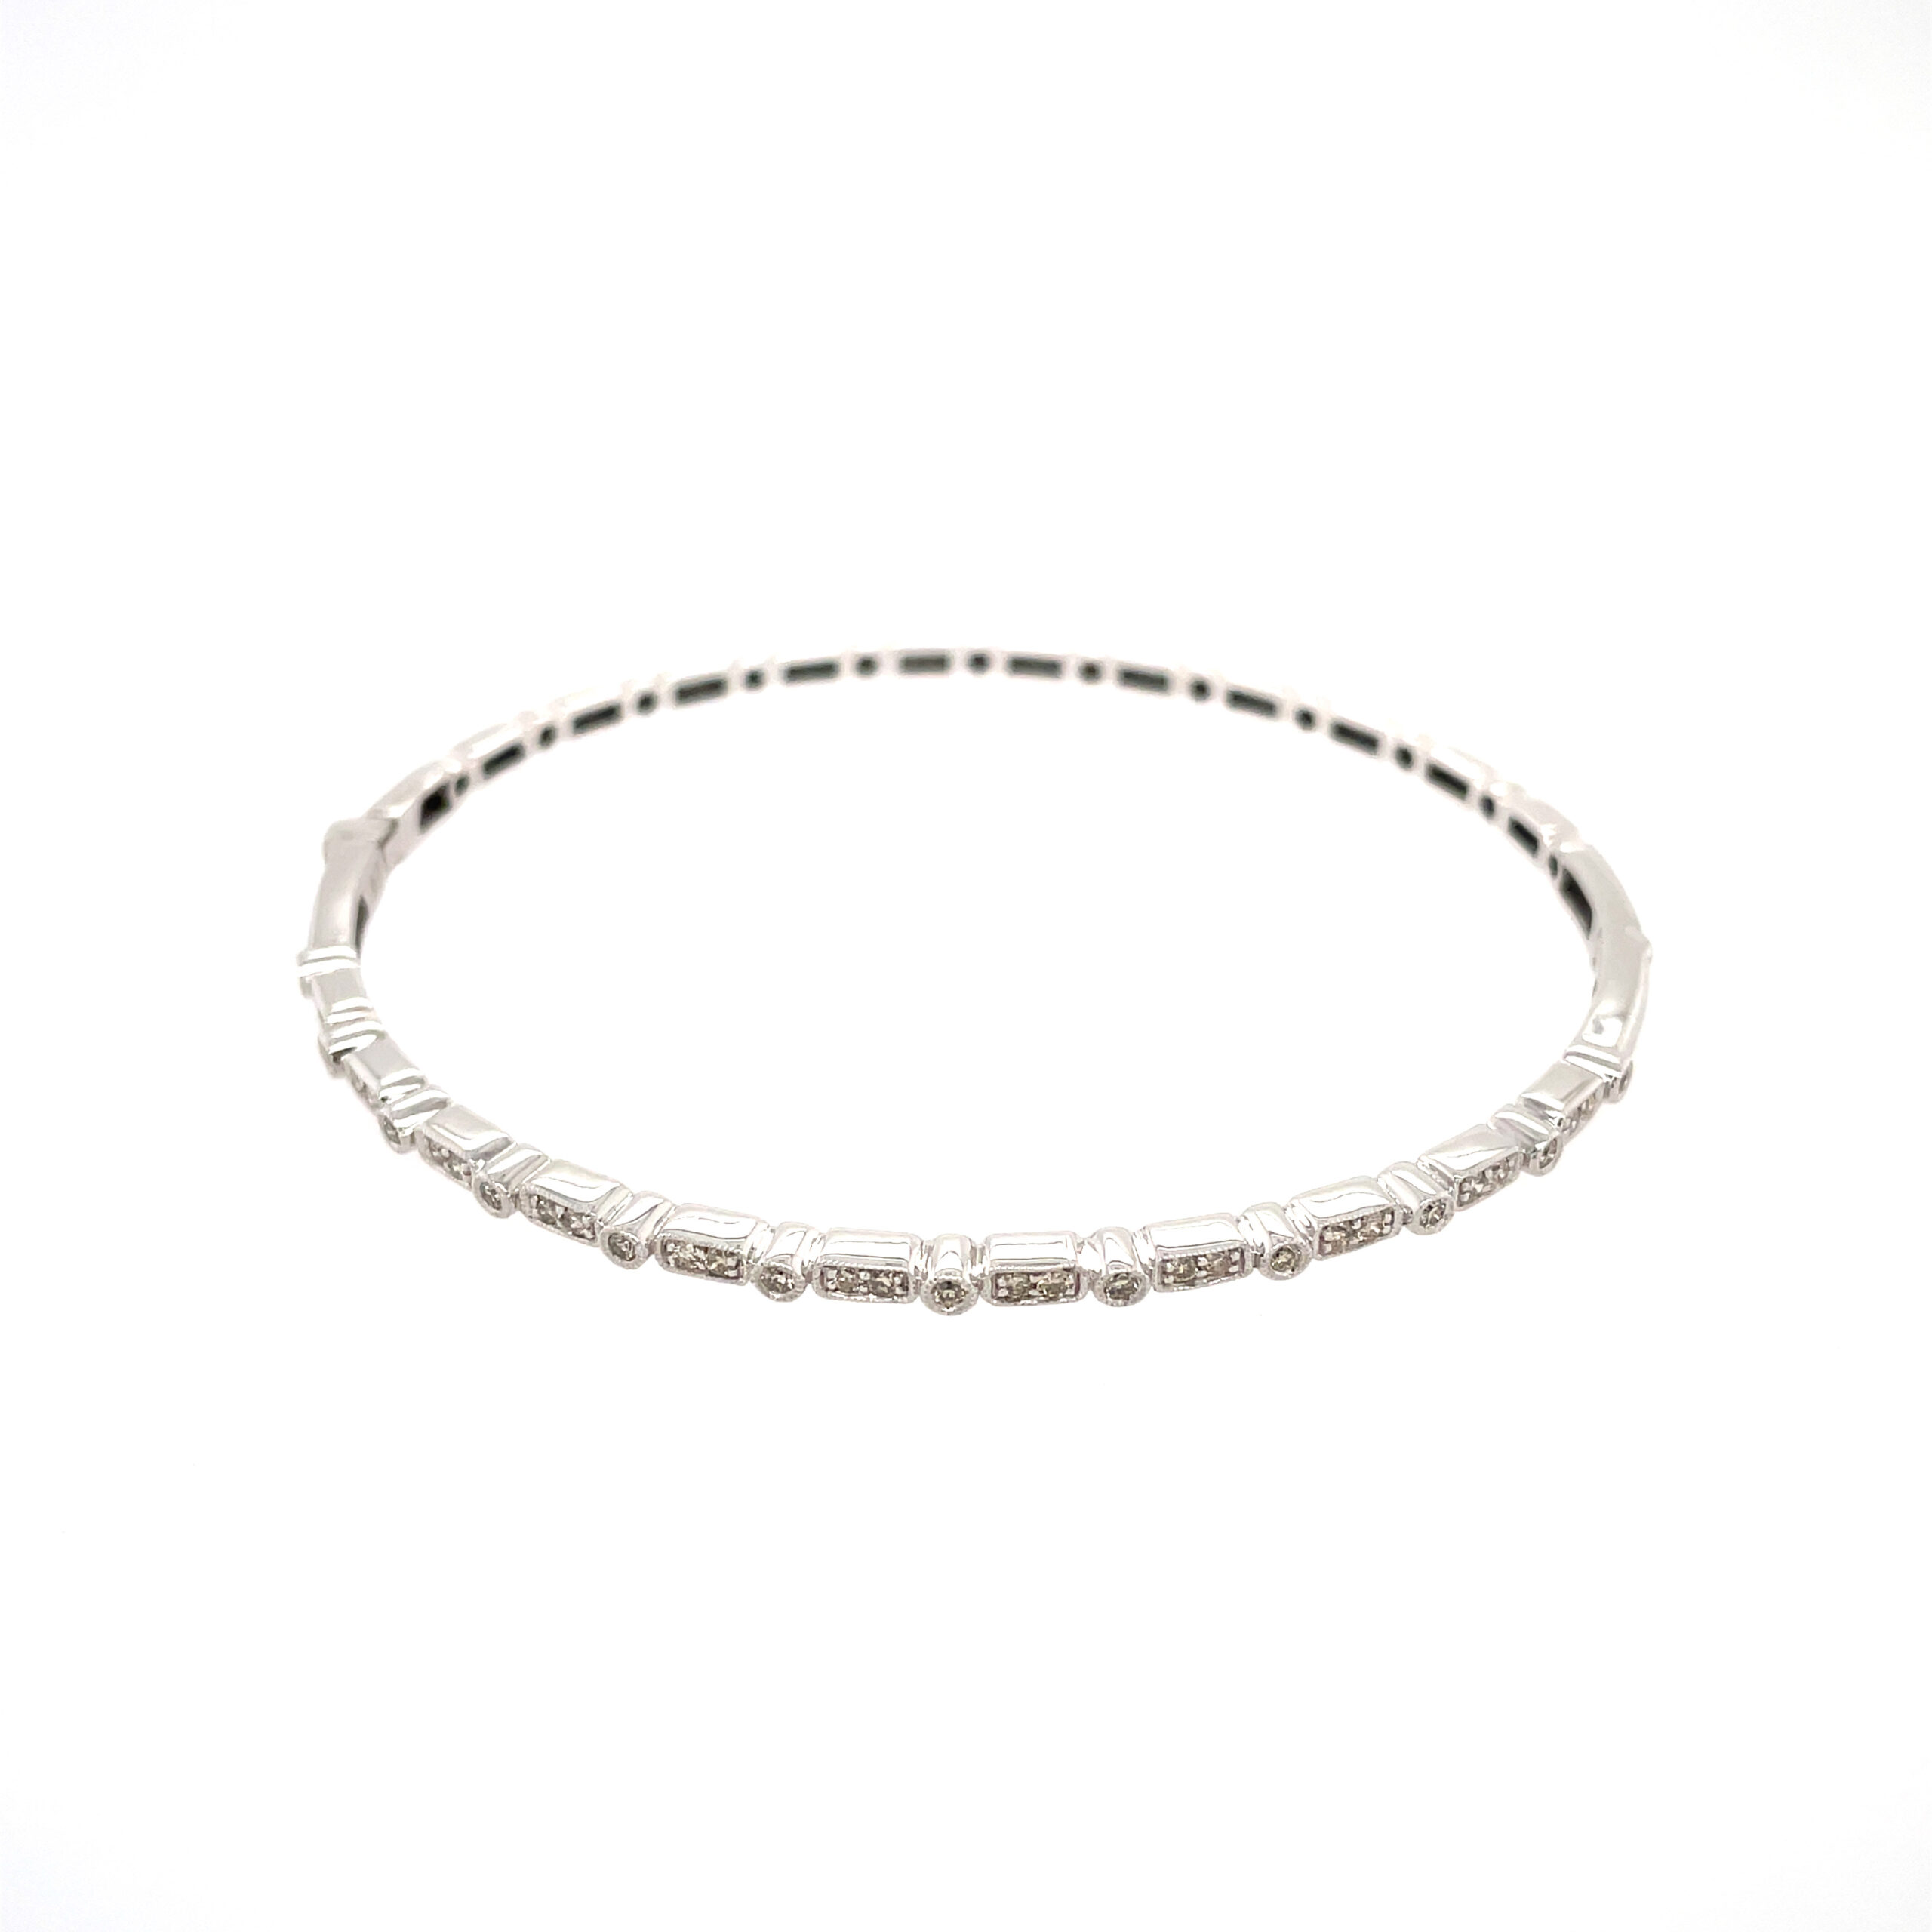 White Gold Antique-Inspired Bangle with Diamonds